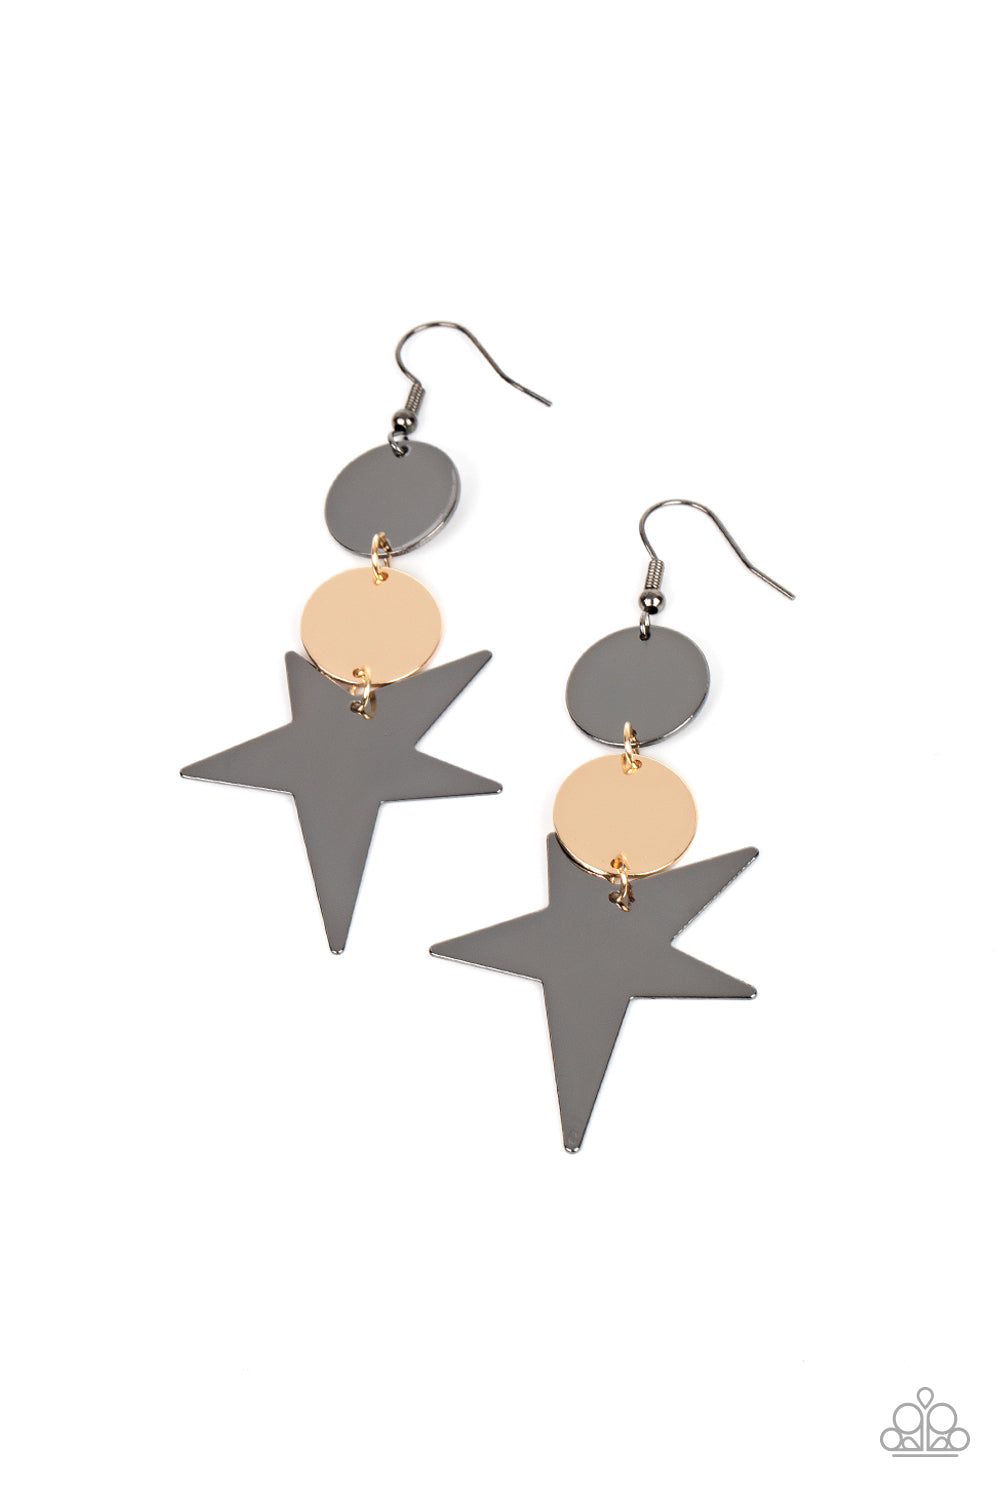 Star Bizzare - Multi Star Earrings an asymmetrical gunmetal star radiates from two linked flat gold and gunmetal discs, resulting in a stellar lure. Earring attaches to a standard fishhook fitting.  Sold as one pair of earrings.